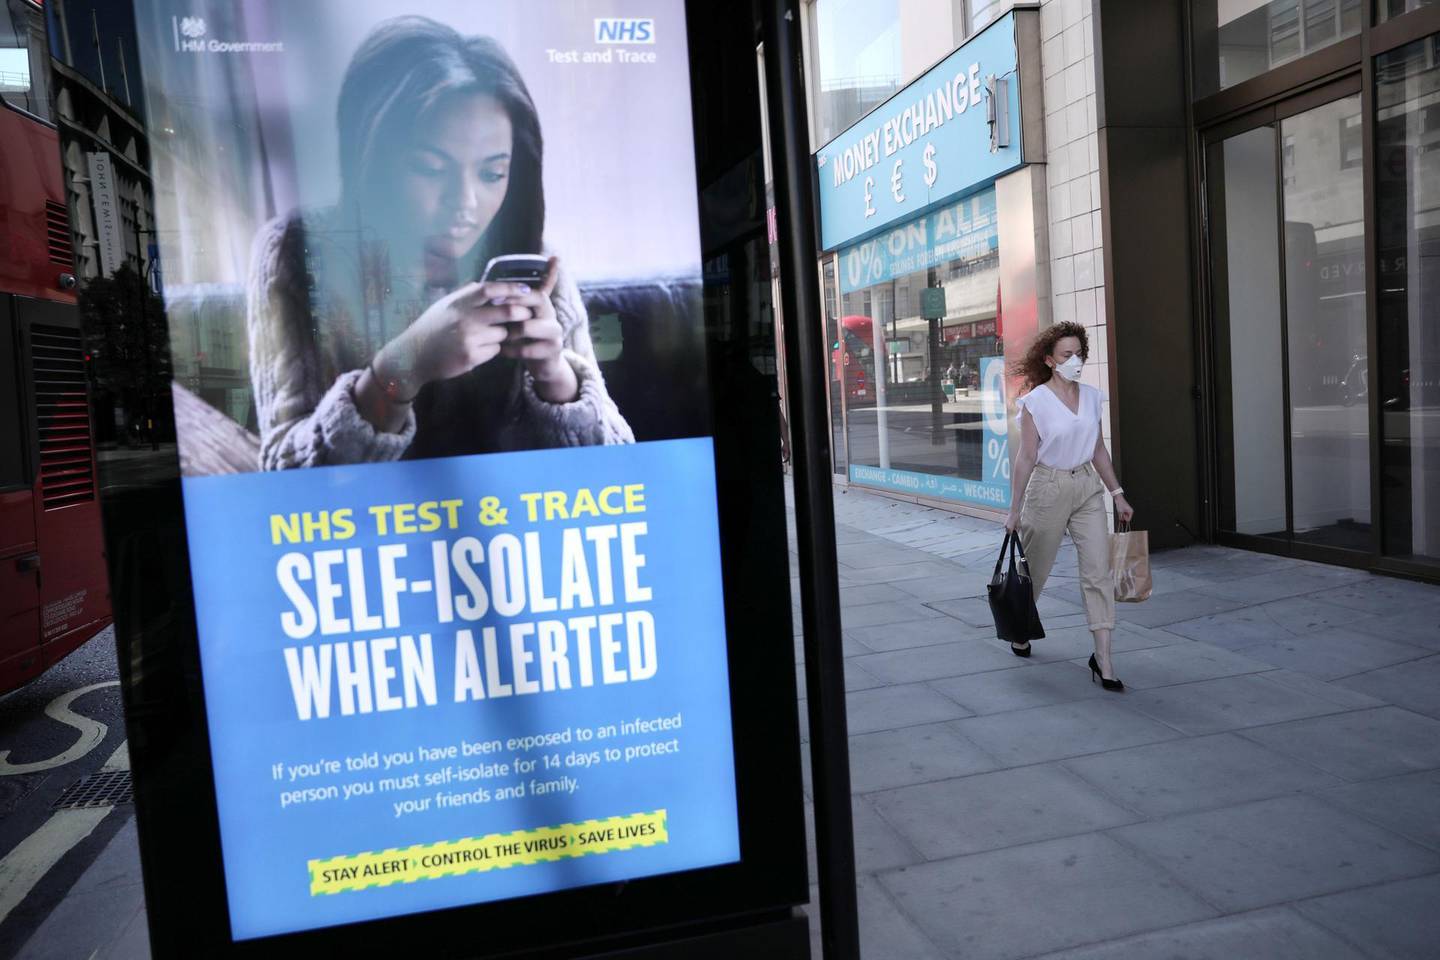 LONDON, ENGLAND - JUNE 15: A woman walks past an NHS Test and Trace advertisement on Oxford Street as stores reopen following closure due to the coronavirus outbreak on June 15, 2020 in London, United Kingdom. The British government have relaxed coronavirus lockdown laws significantly from Monday June 15, allowing zoos, safari parks and non-essential shops to open to visitors. Places of worship will allow individual prayers and protective facemasks become mandatory on London Transport. (Photo by Dan Kitwood/Getty Images)